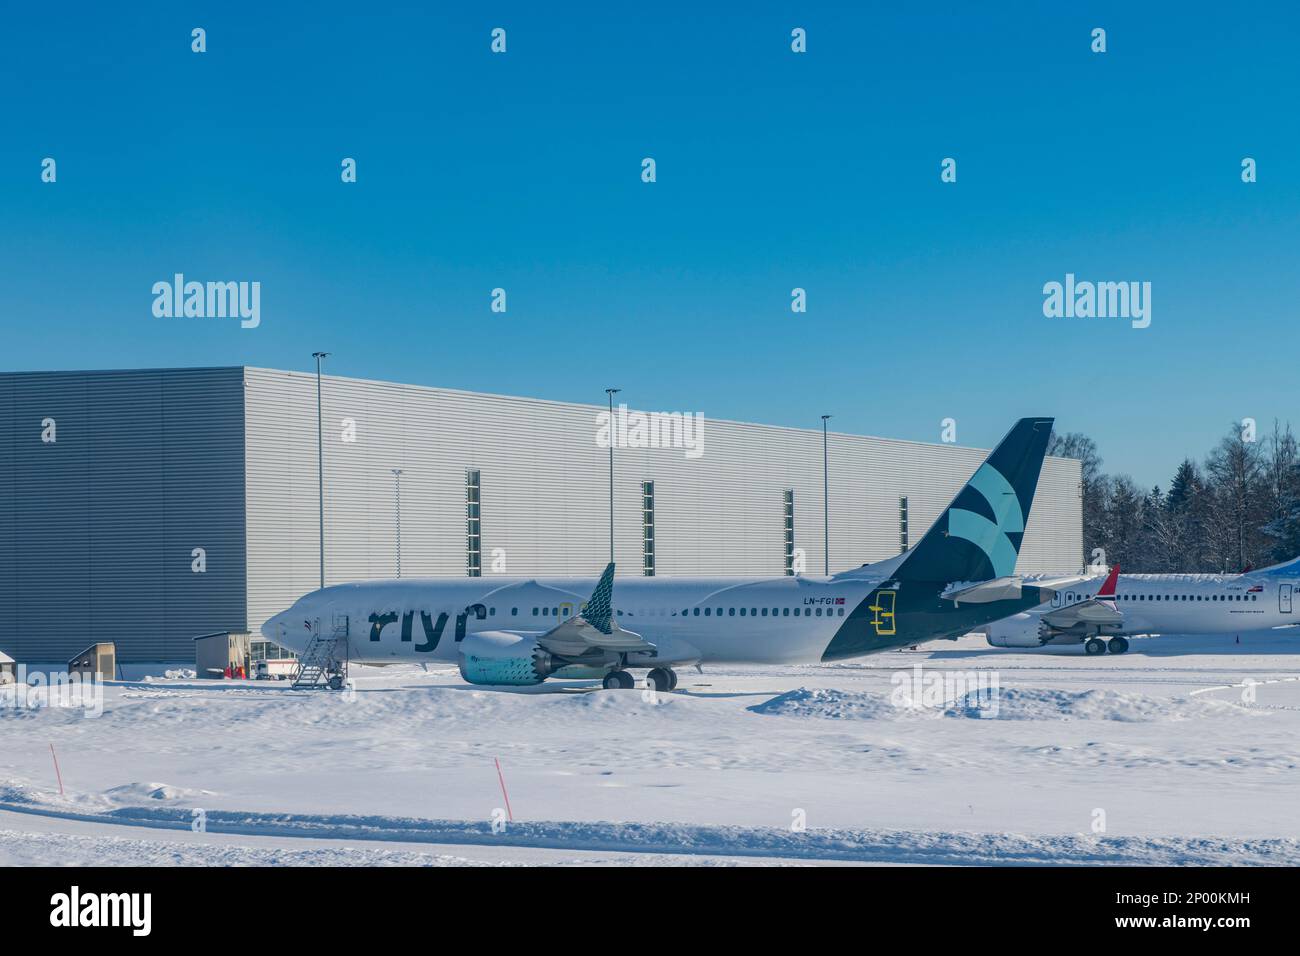 A grounded plane covered in snow belonging to the bankrupt budget airline Flyr Stock Photo